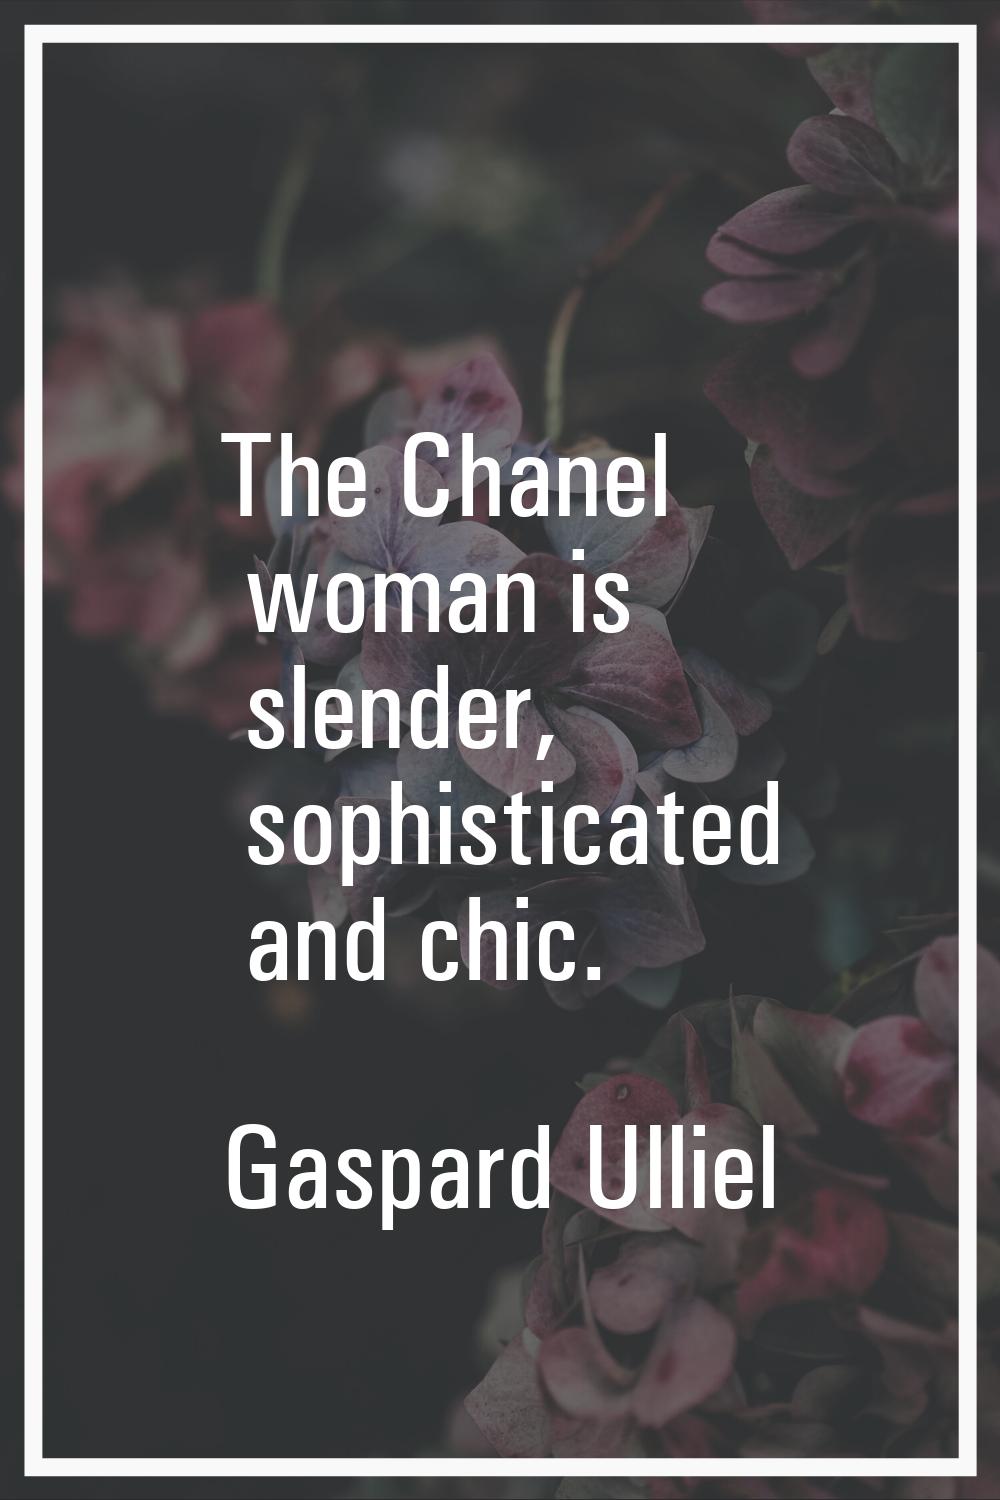 The Chanel woman is slender, sophisticated and chic.